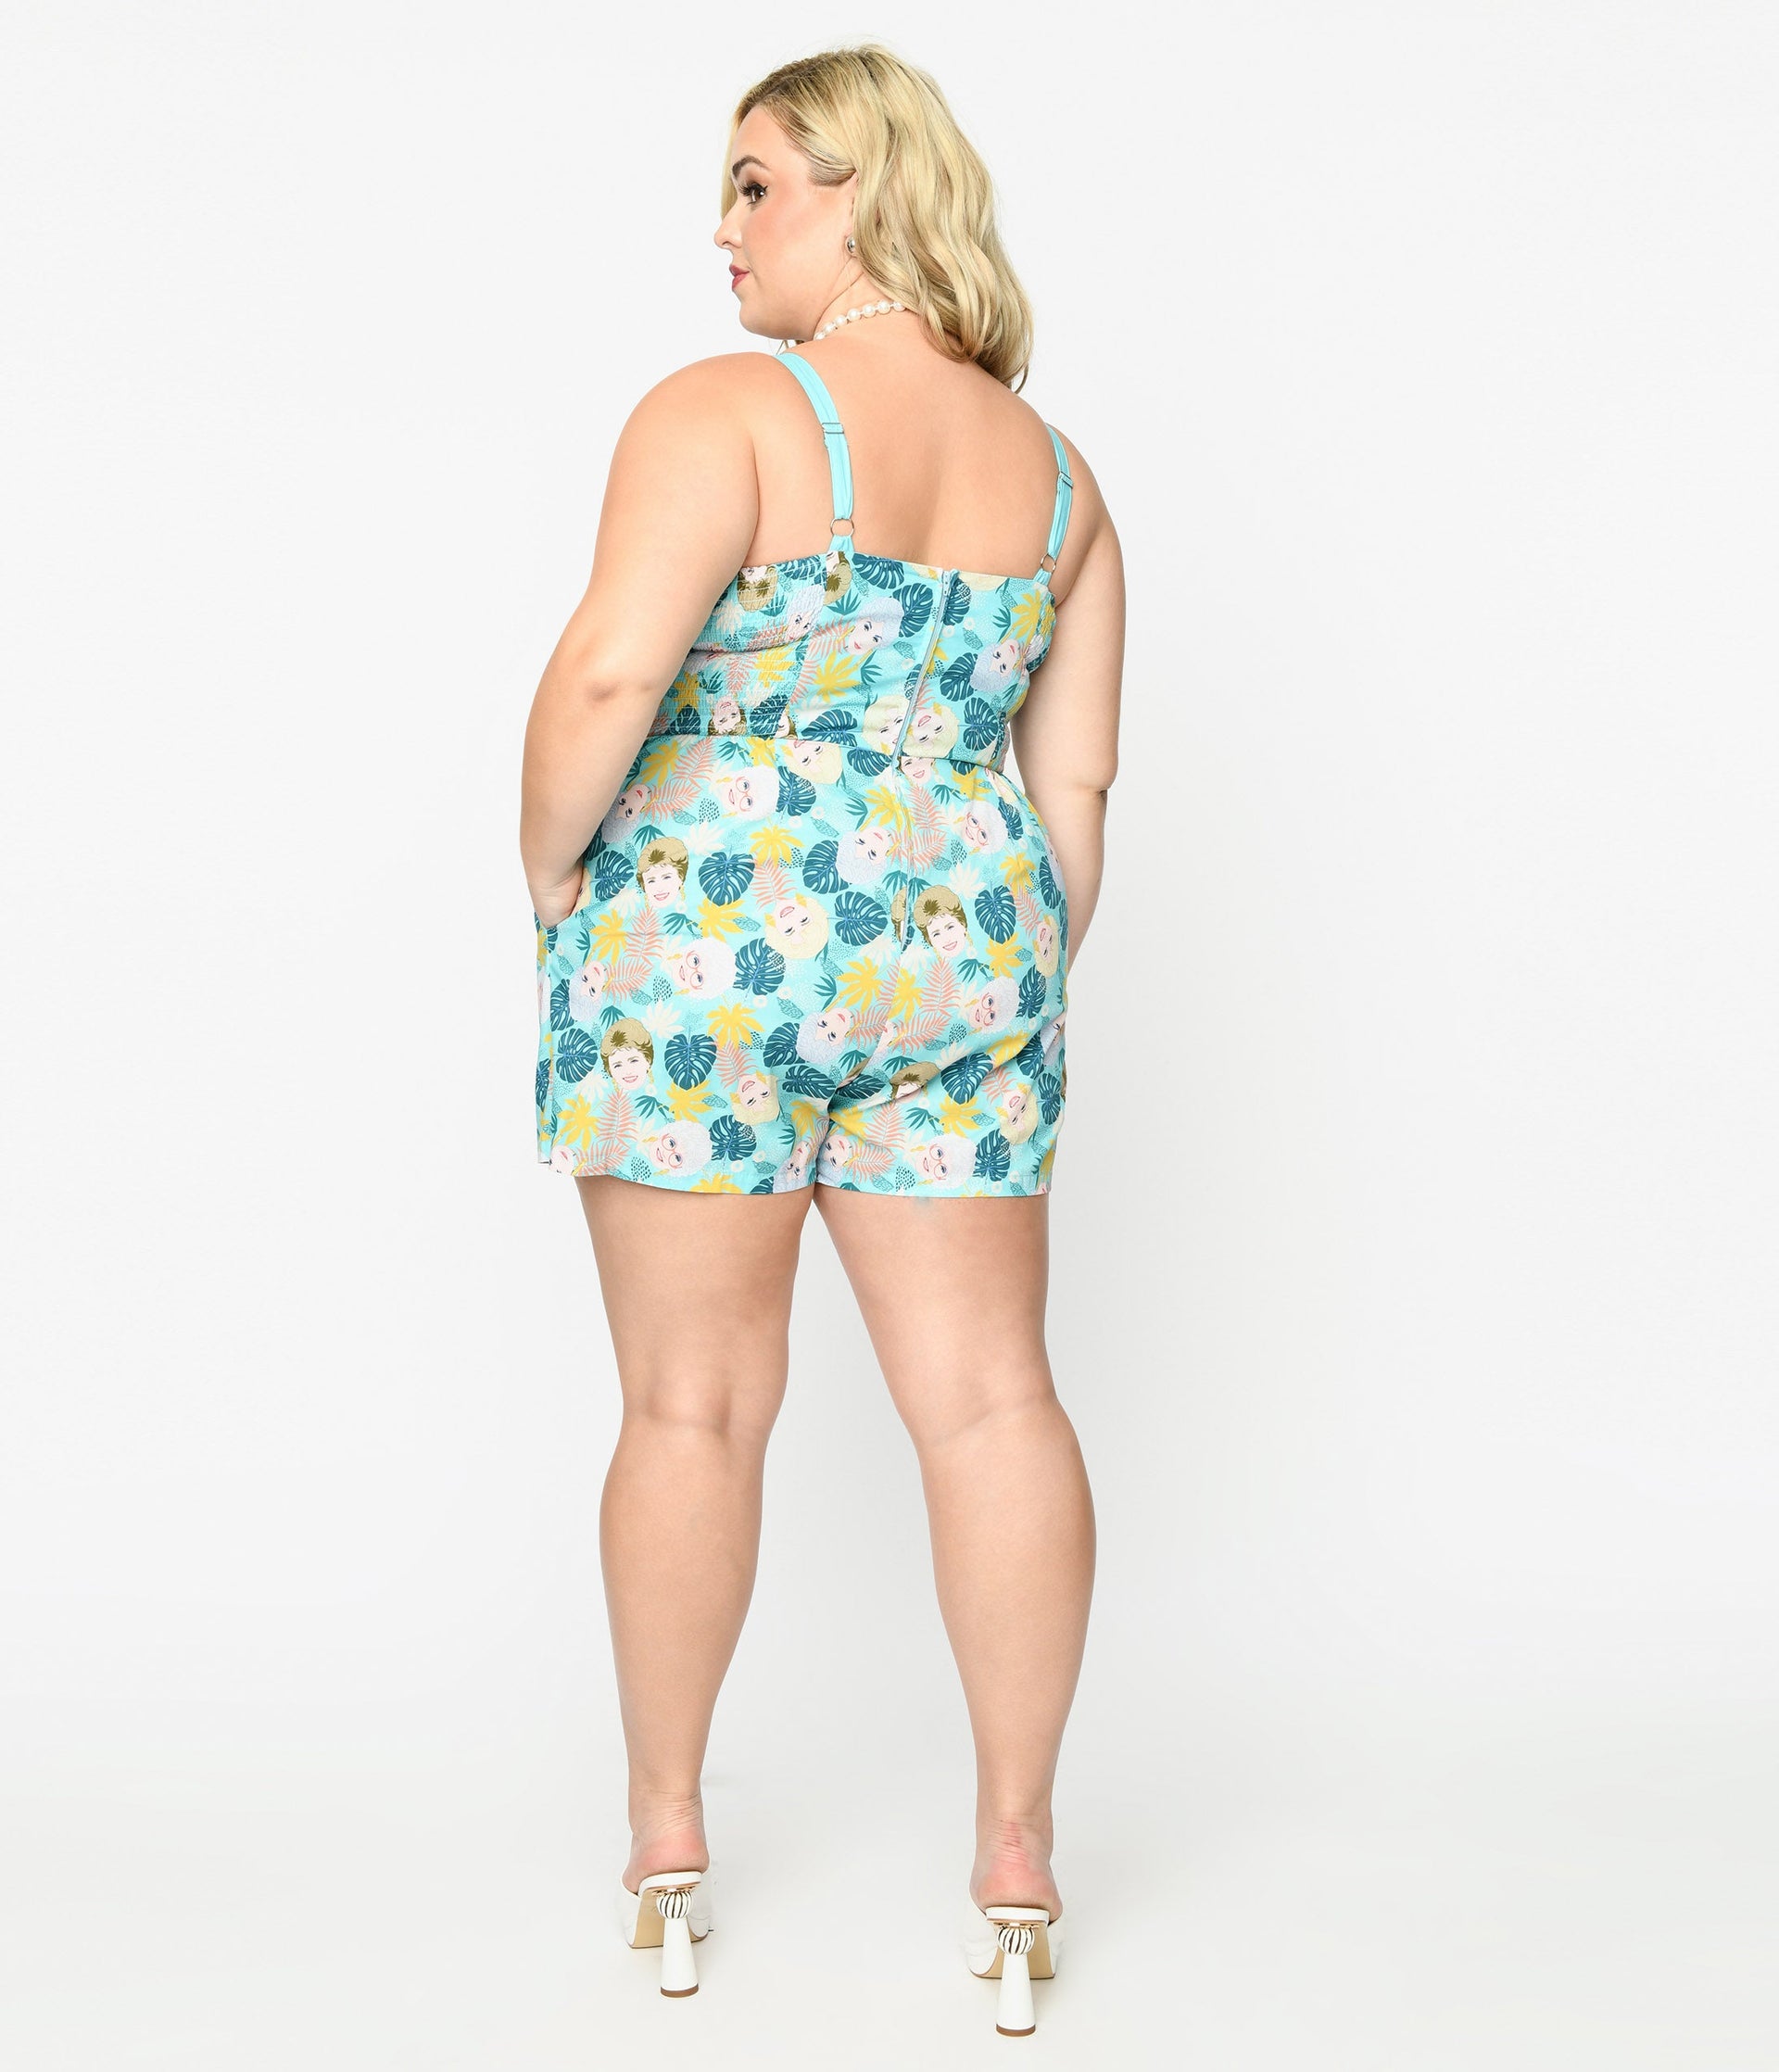 The Golden Girls x Unique Vintage Plus Size Aqua Character Print Skirted Dolly Romper - Unique Vintage - Womens, BOTTOMS, ROMPERS AND JUMPSUITS